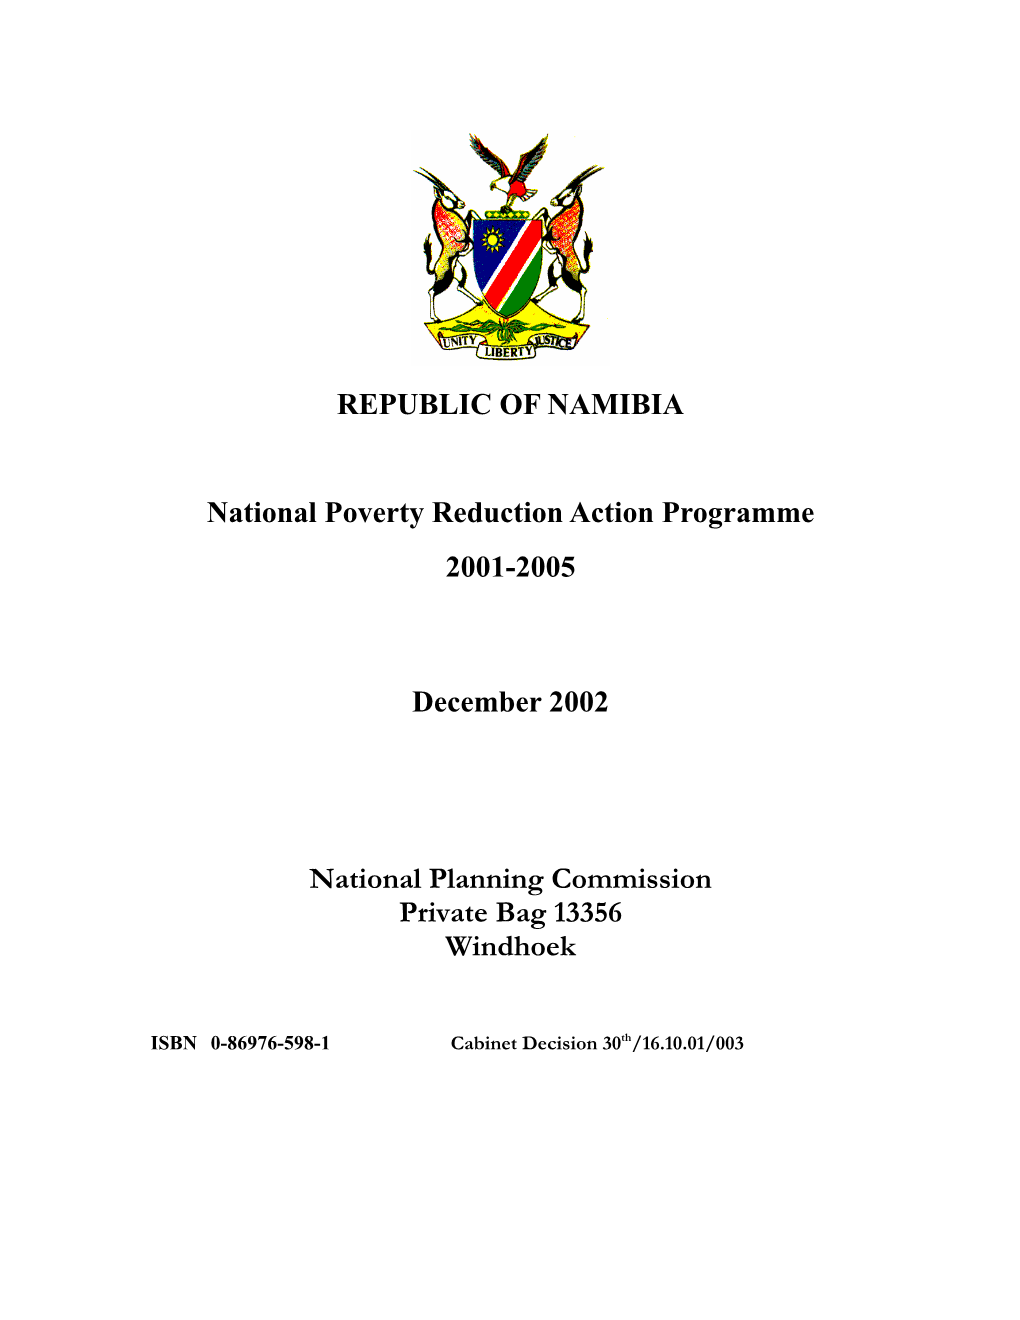 REPUBLIC of NAMIBIA National Poverty Reduction Action Programme 2001-2005 December 2002 National Planning Commission Private